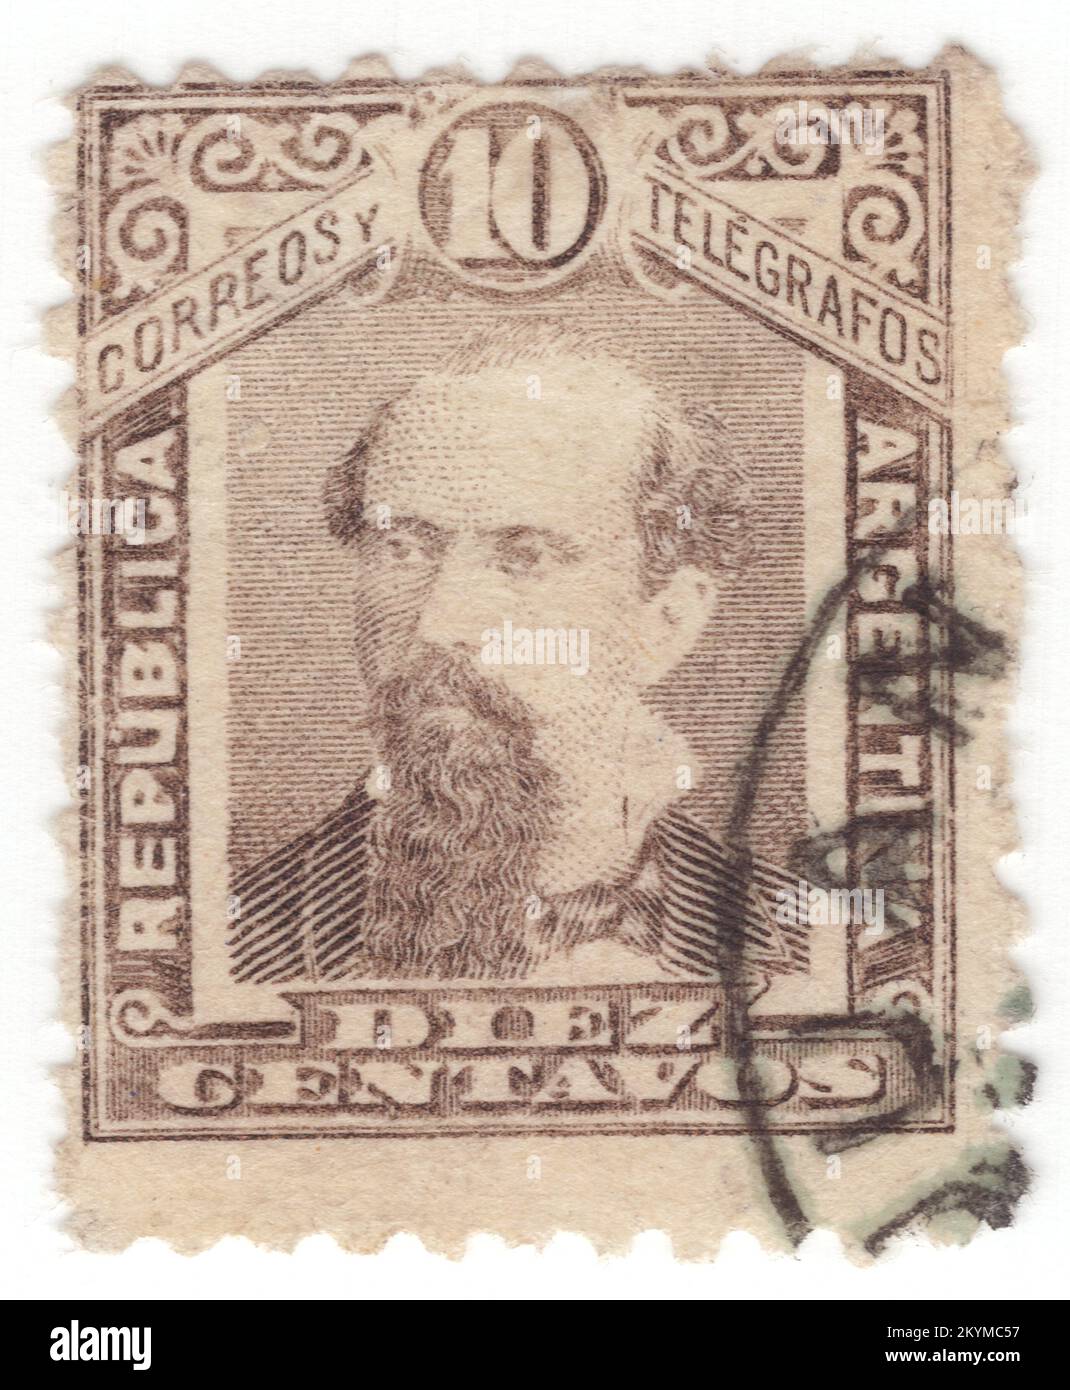 ARGENTINA - 1890: 10 centavos brown postage stamp depicting portrait of Nicolas Remigio Aurelio Avellaneda Silva. He was an Argentine politician and journalist, and President of Argentina from 1874 to 1880. Avellaneda's main projects while in office were banking and education reform, leading to Argentina's economic growth. The most important events of his government were the Conquest of the Desert and the transformation of the Buenos Aires into a federal district. His grandson was Jose Domingo Molina Gomez, who took presidency when Juan Peron was captured Stock Photo